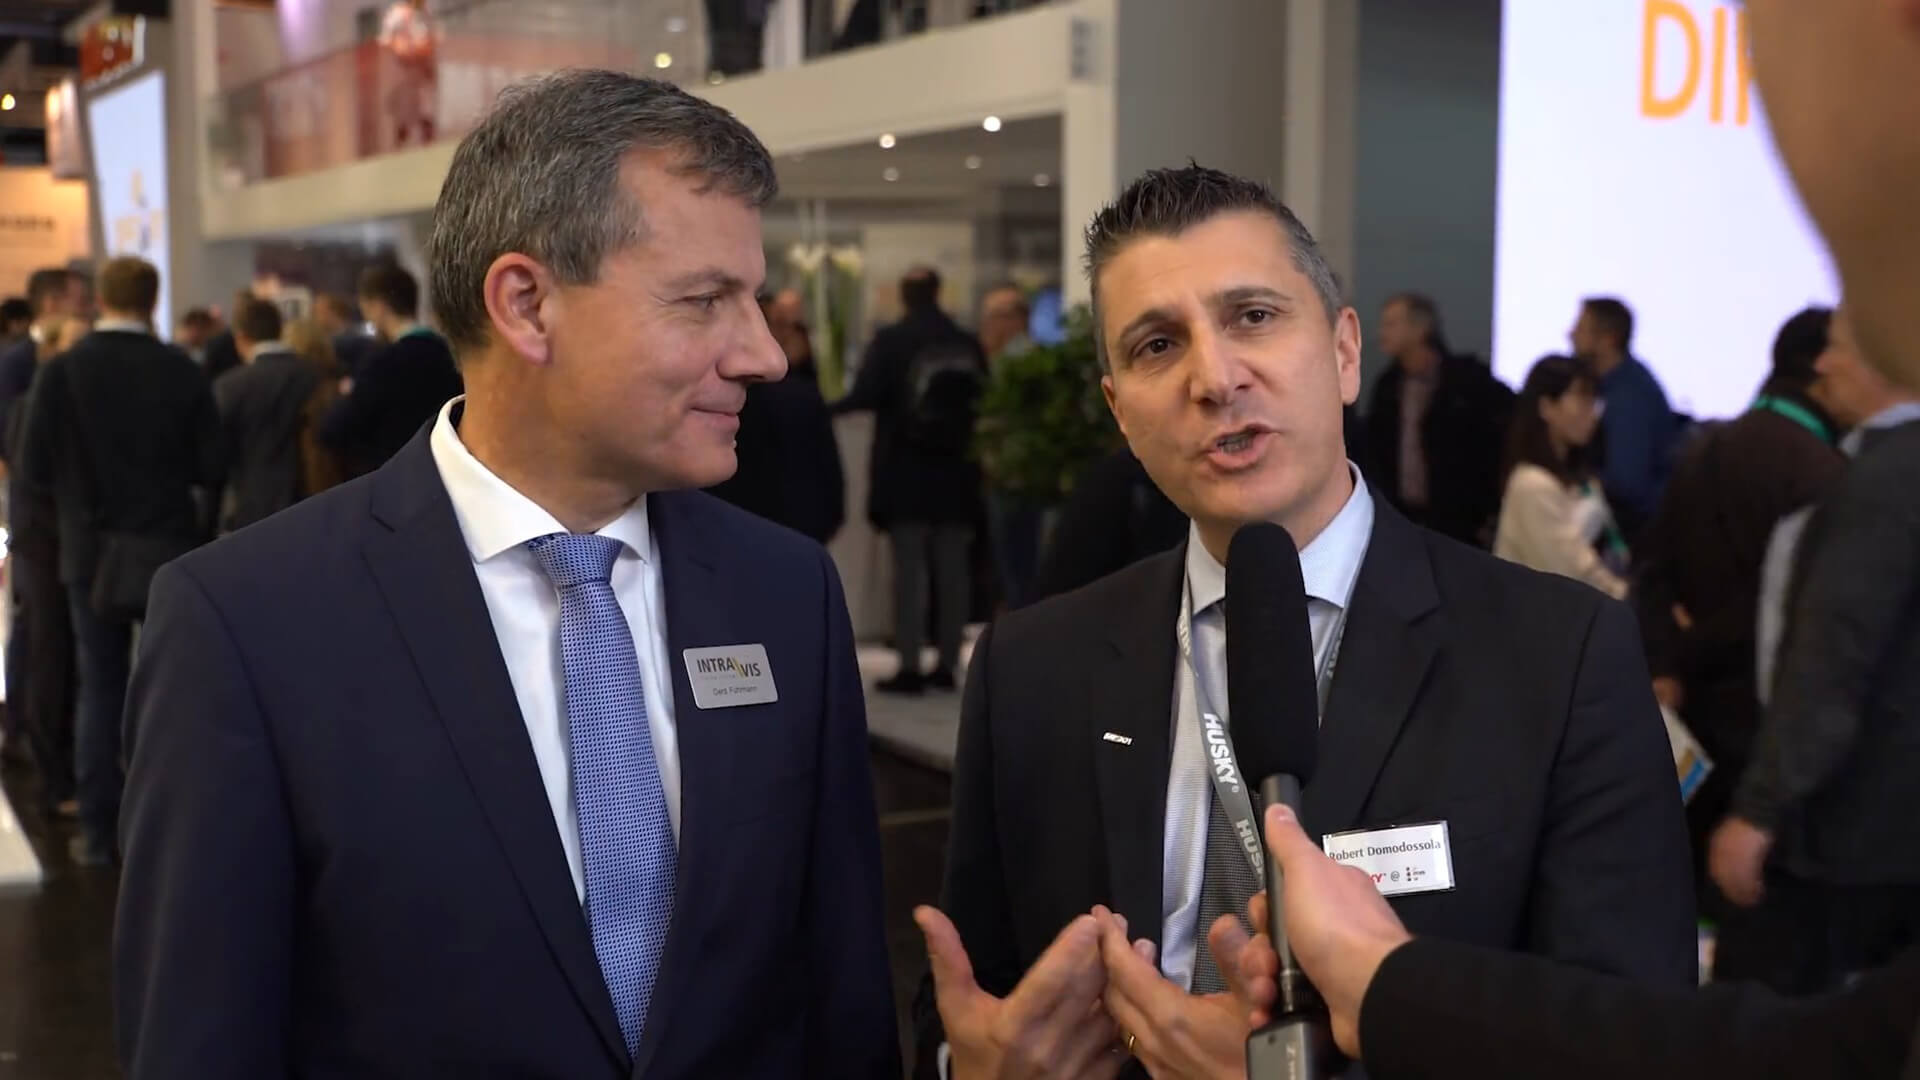 Robert Domodossola, President Rigid Packaging at Husky, and Dr. Gerd Fuhrmann, CEO at INTRAVIS give an Interview about the PreMon